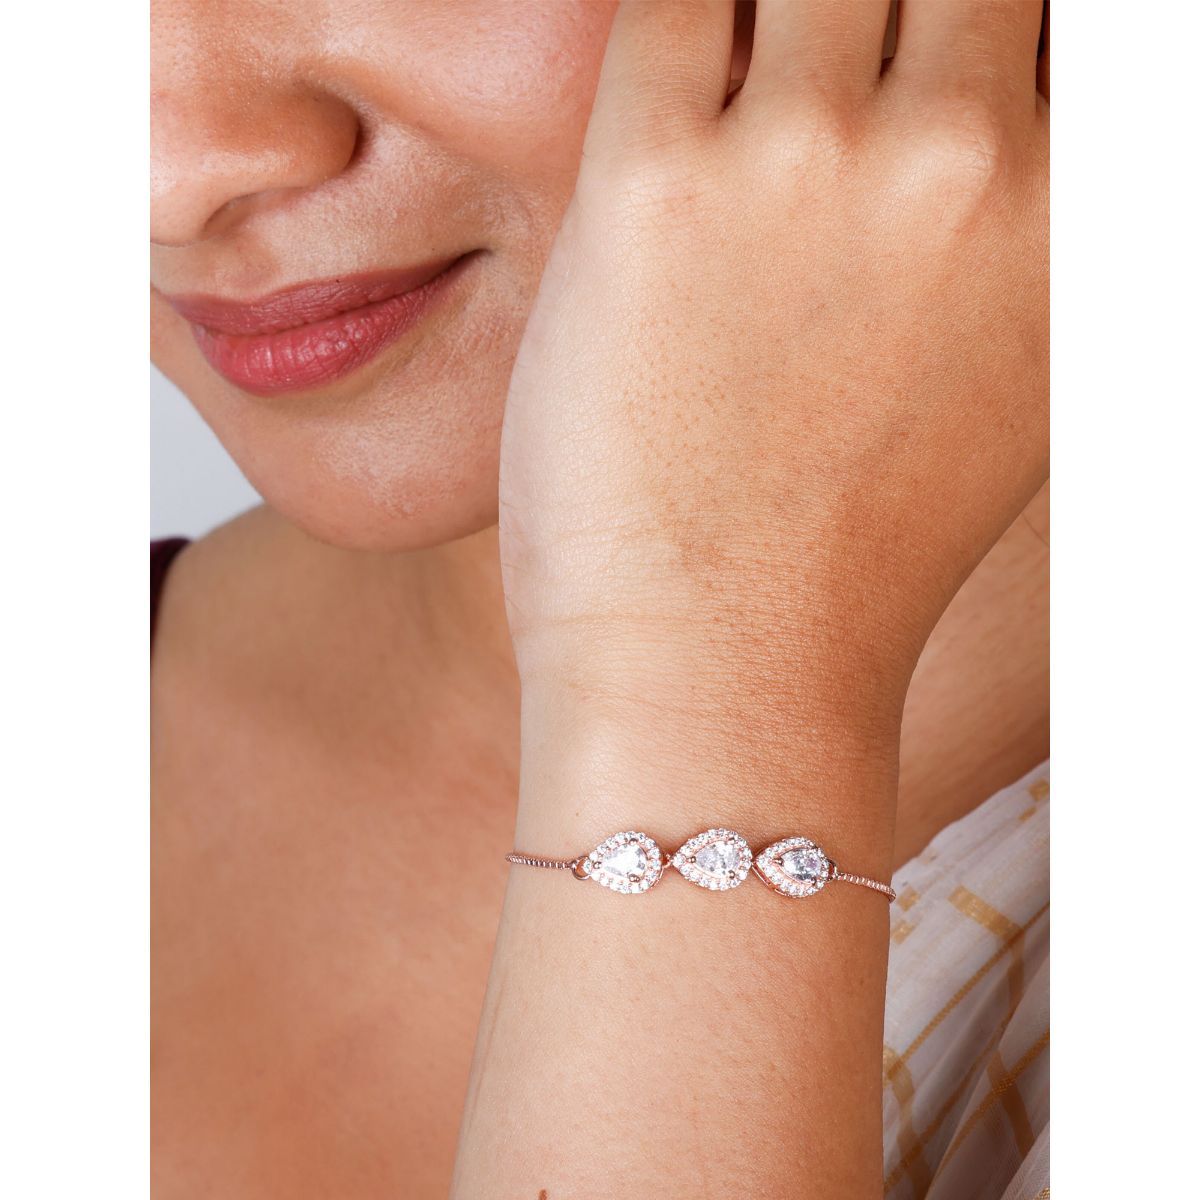 Aarambh Sterling Silver Bracelet  LOVE Bracelet Blue Stone  Genuine 925  Sterling Silver  With Certificate of Authenticity  Gift For Women and  Girls  Amazonin Jewellery